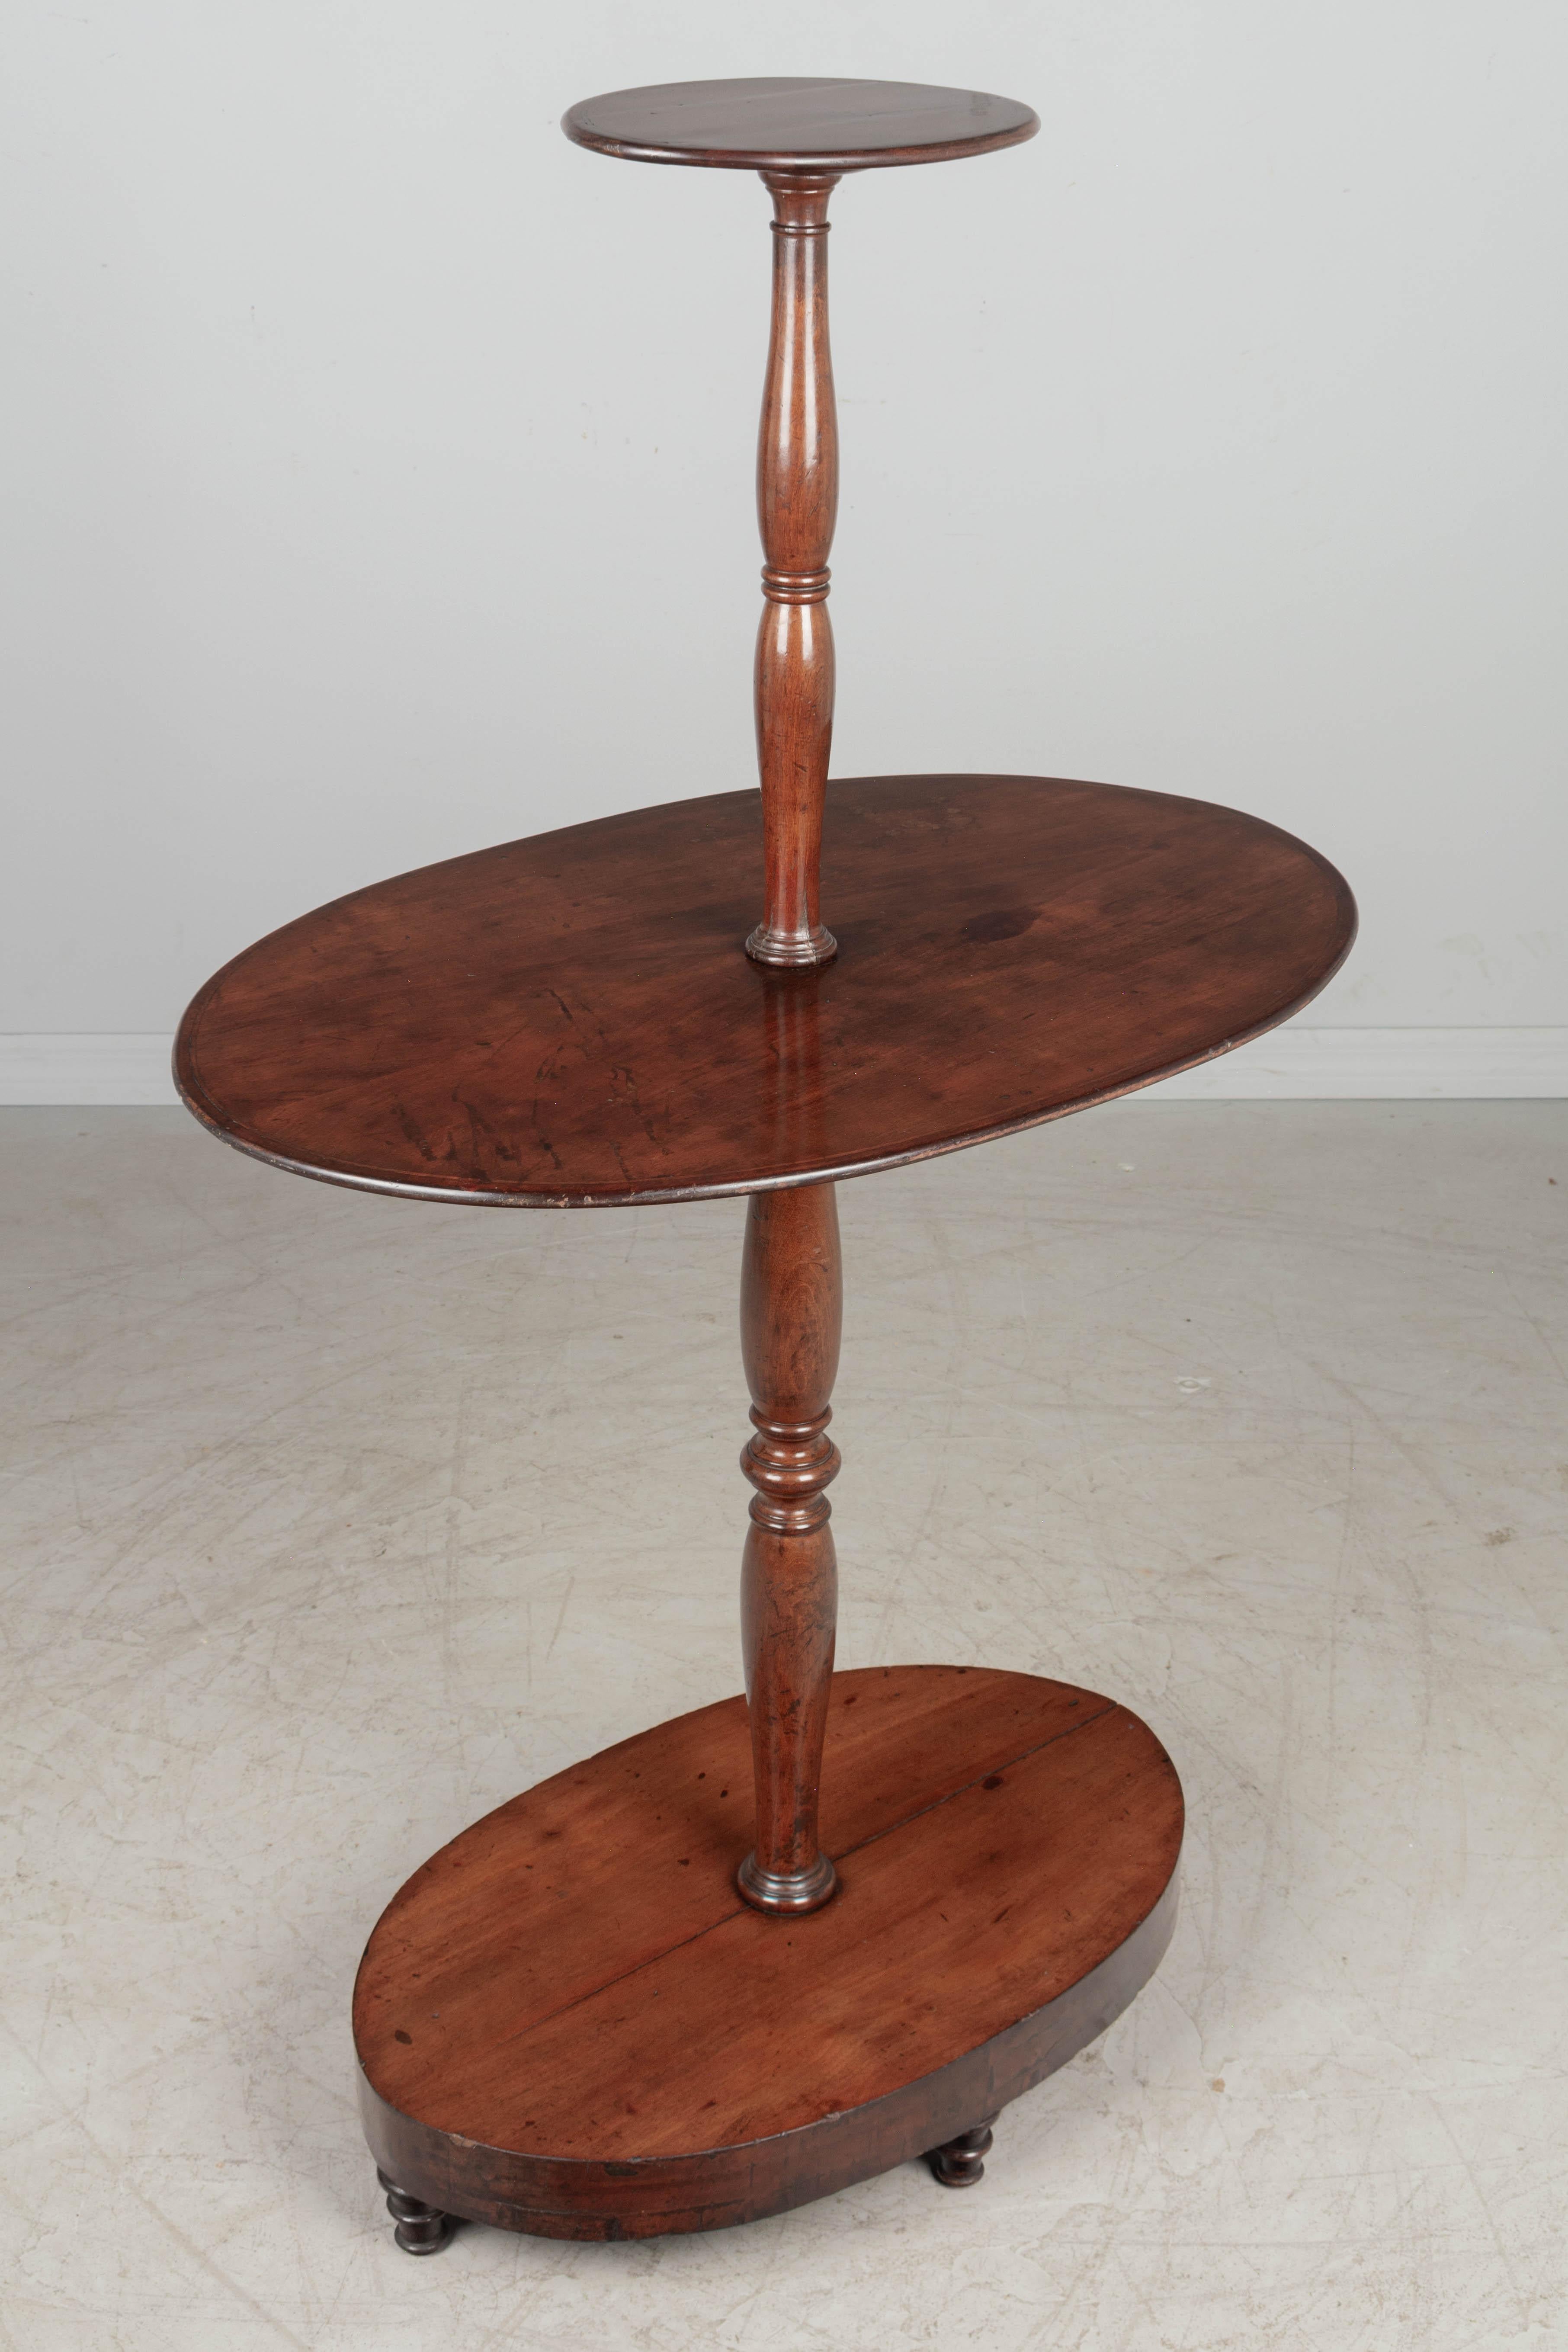 Hand-Crafted 19th Century English Mahogany Tiered Table or Stand For Sale